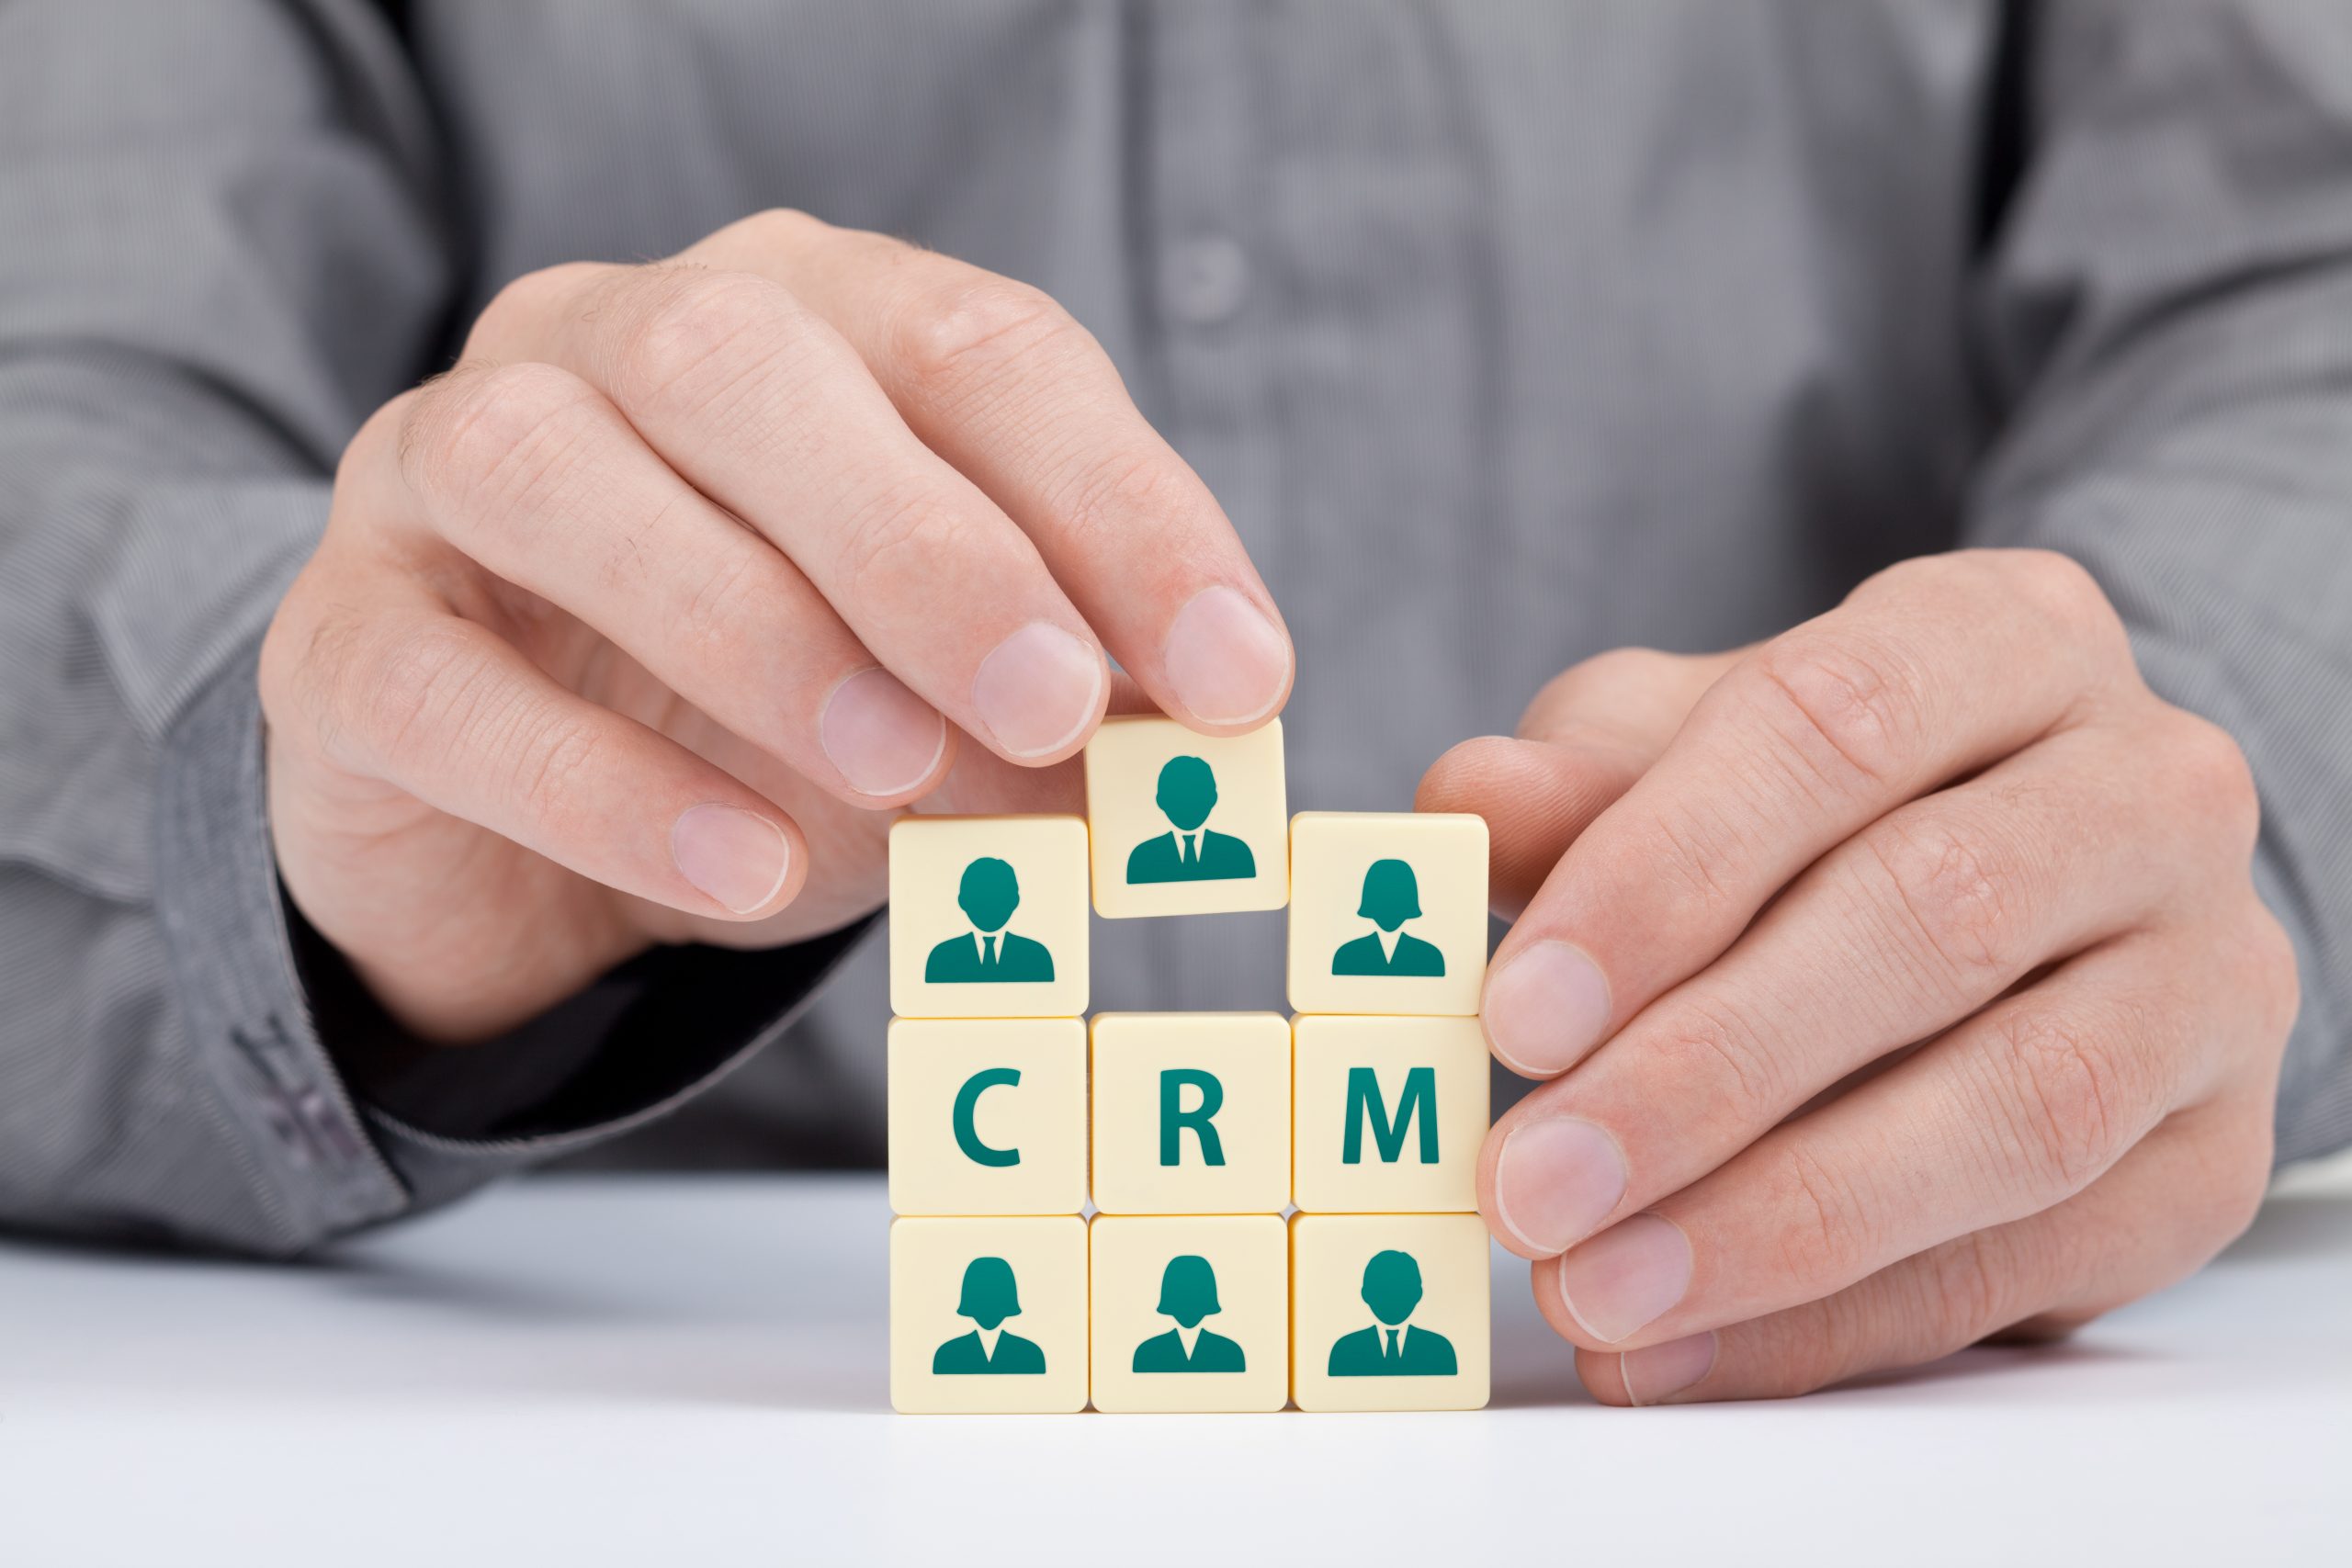 three building blocks labeled CRM in between six building blocks with a person icon